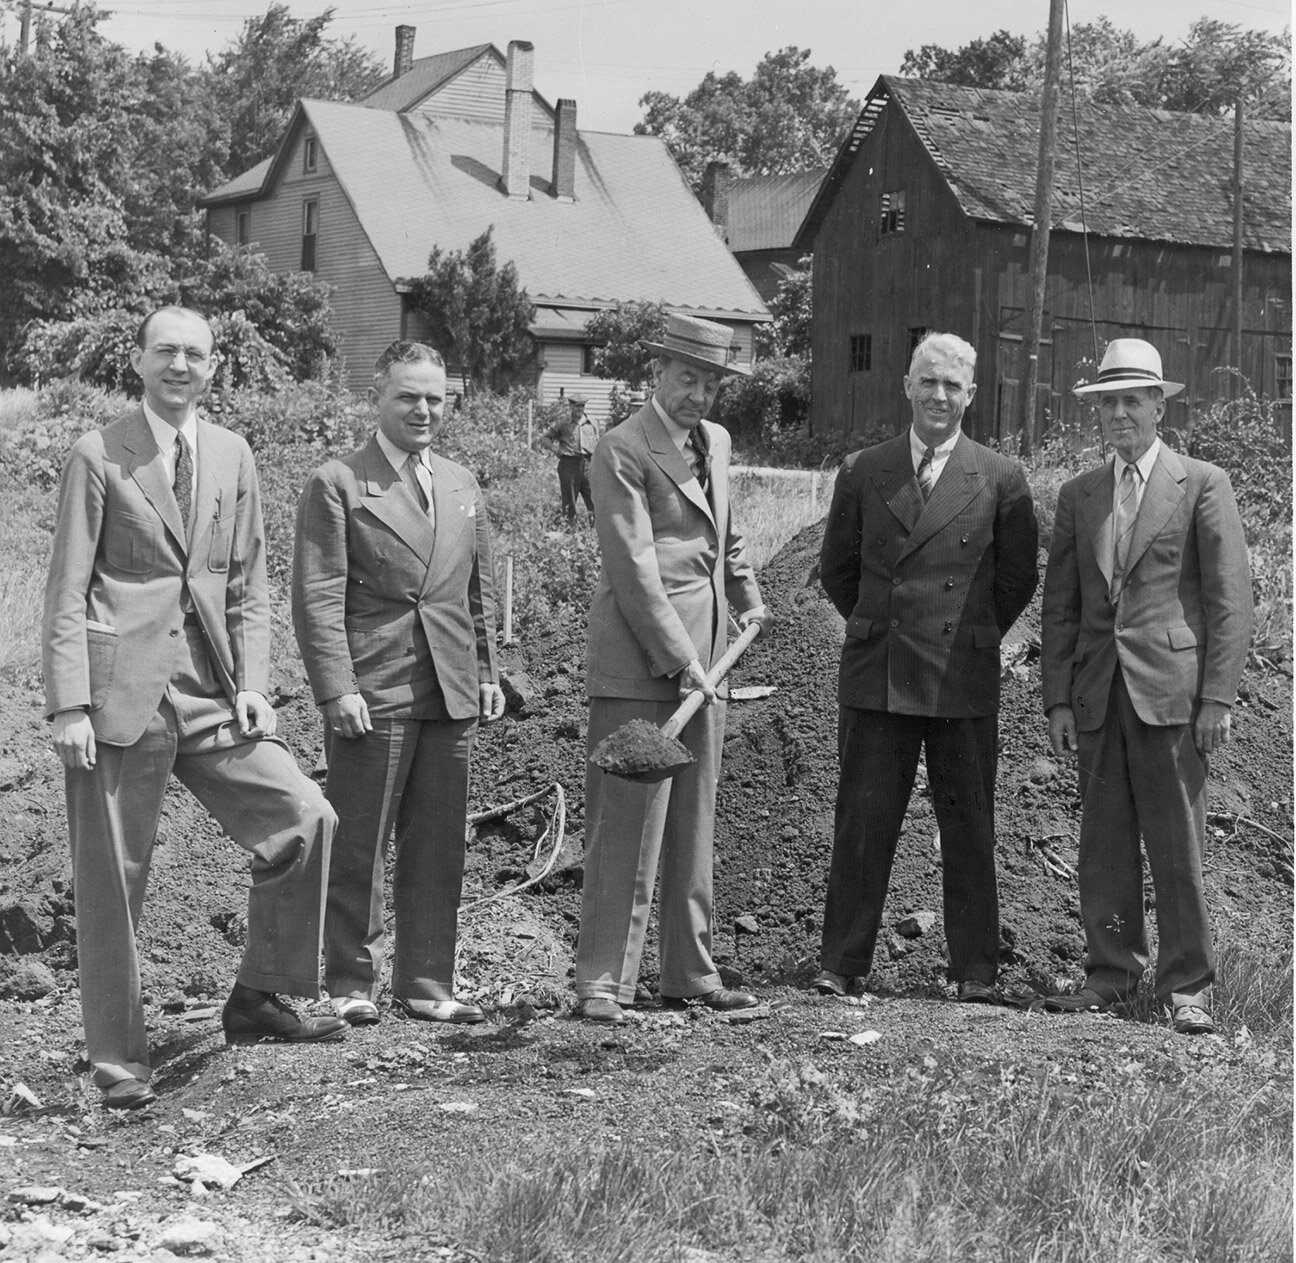 The groundbreaking of the Honeywell Center in 1940.